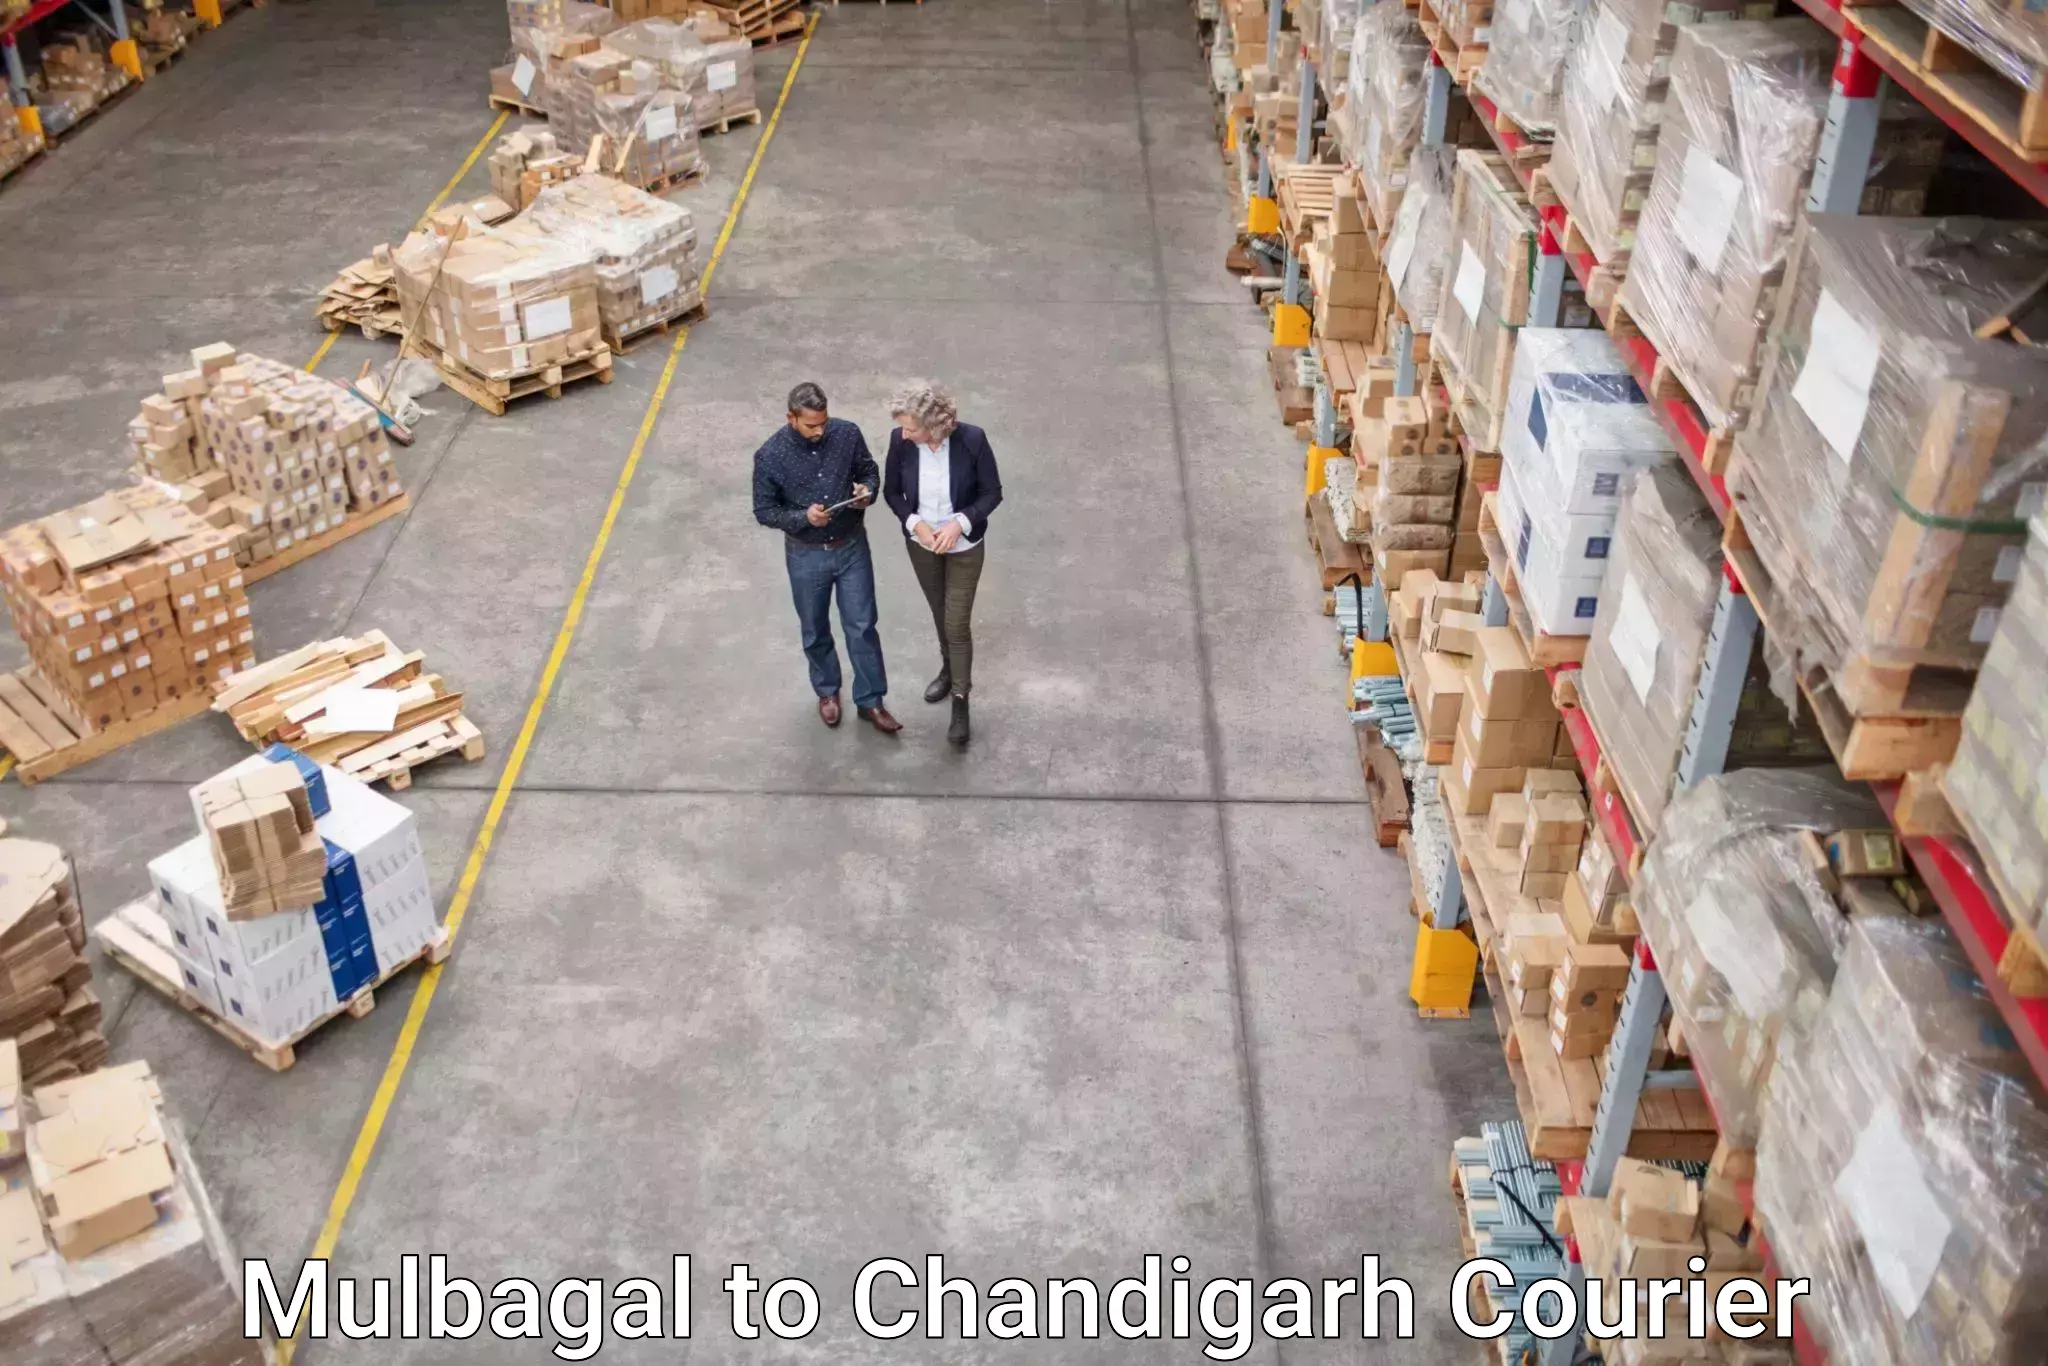 Doorstep delivery service Mulbagal to Chandigarh